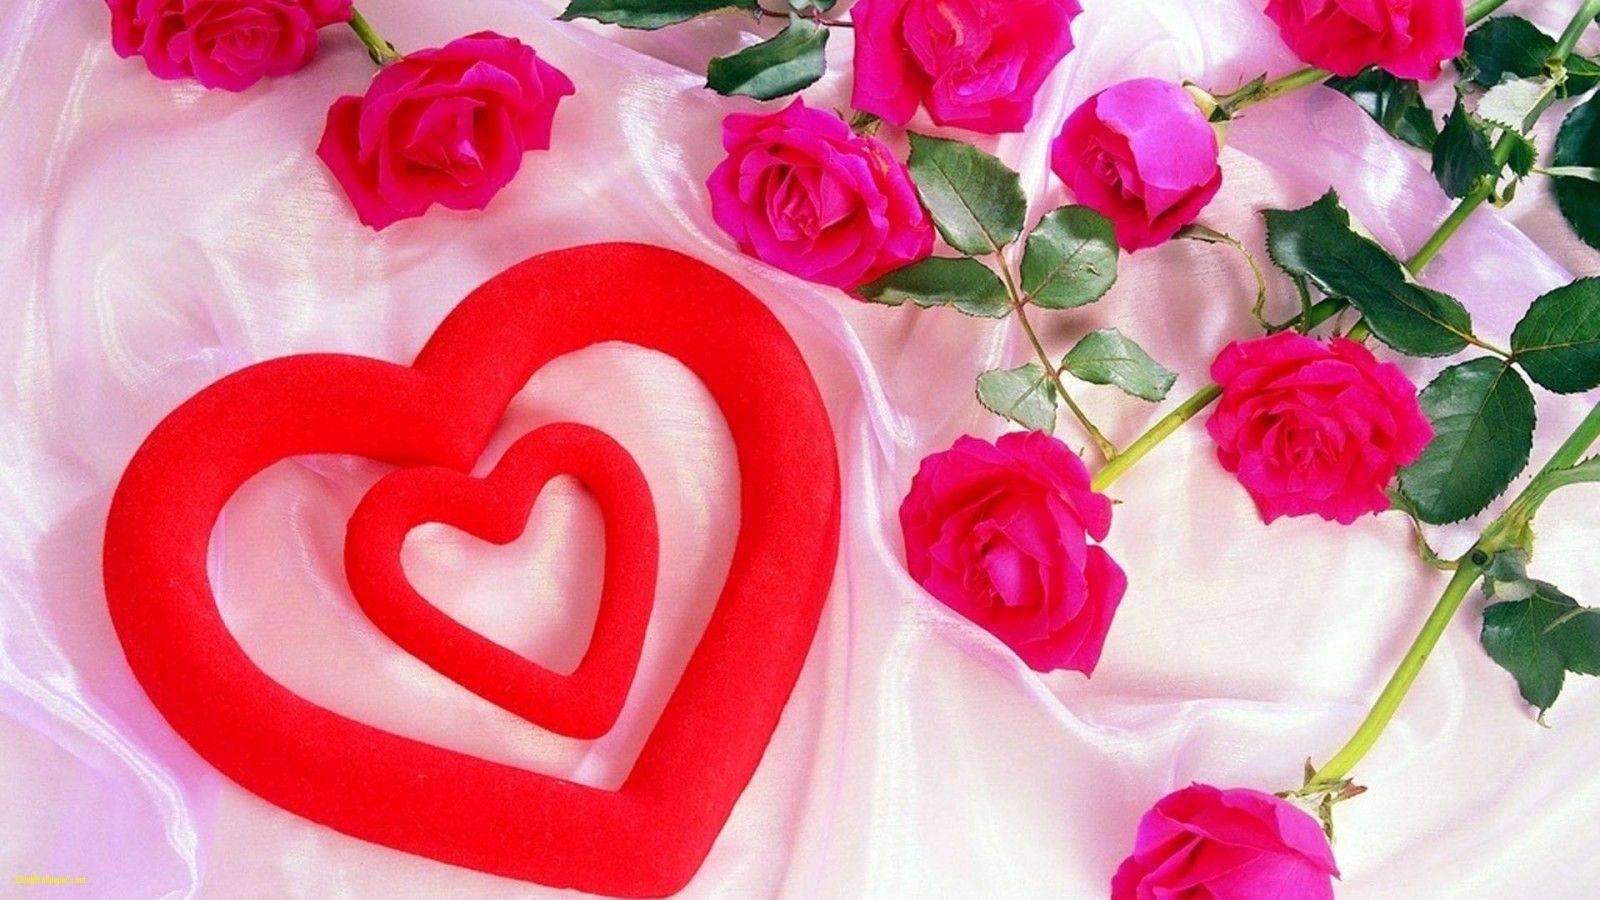 Love Roses and Hearts Wallpaper Beautiful Cute Red Heart Girl Best